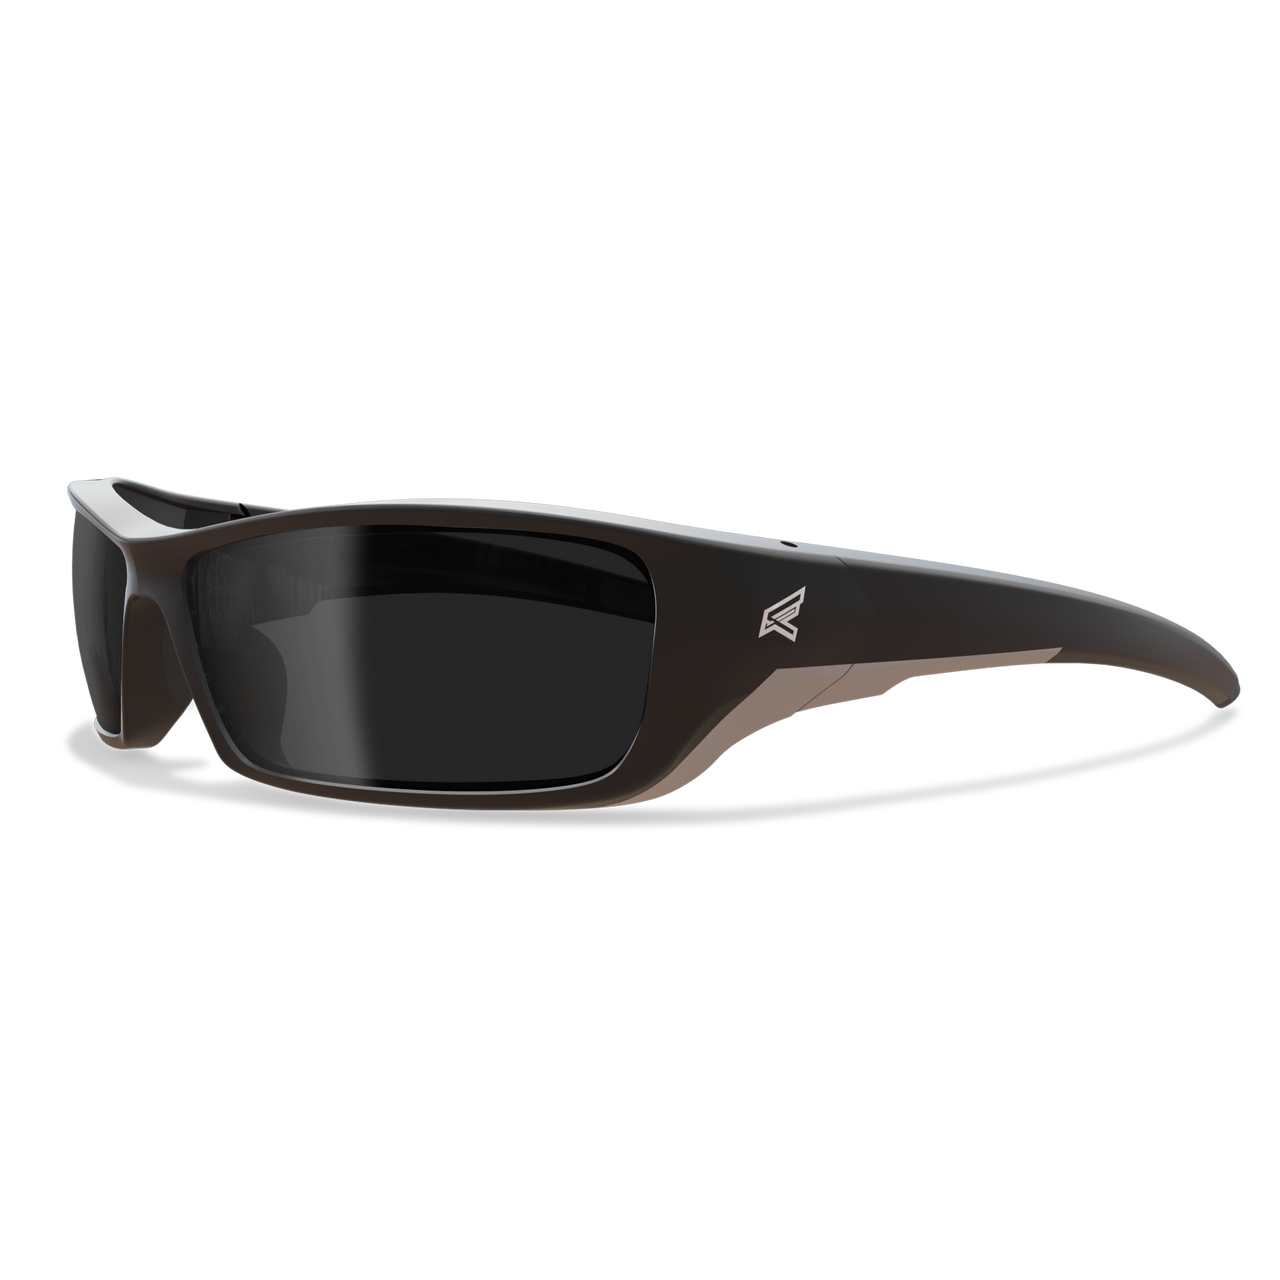 Edge Reclus - Safety Glasses with Black Frame and Smoke Lens